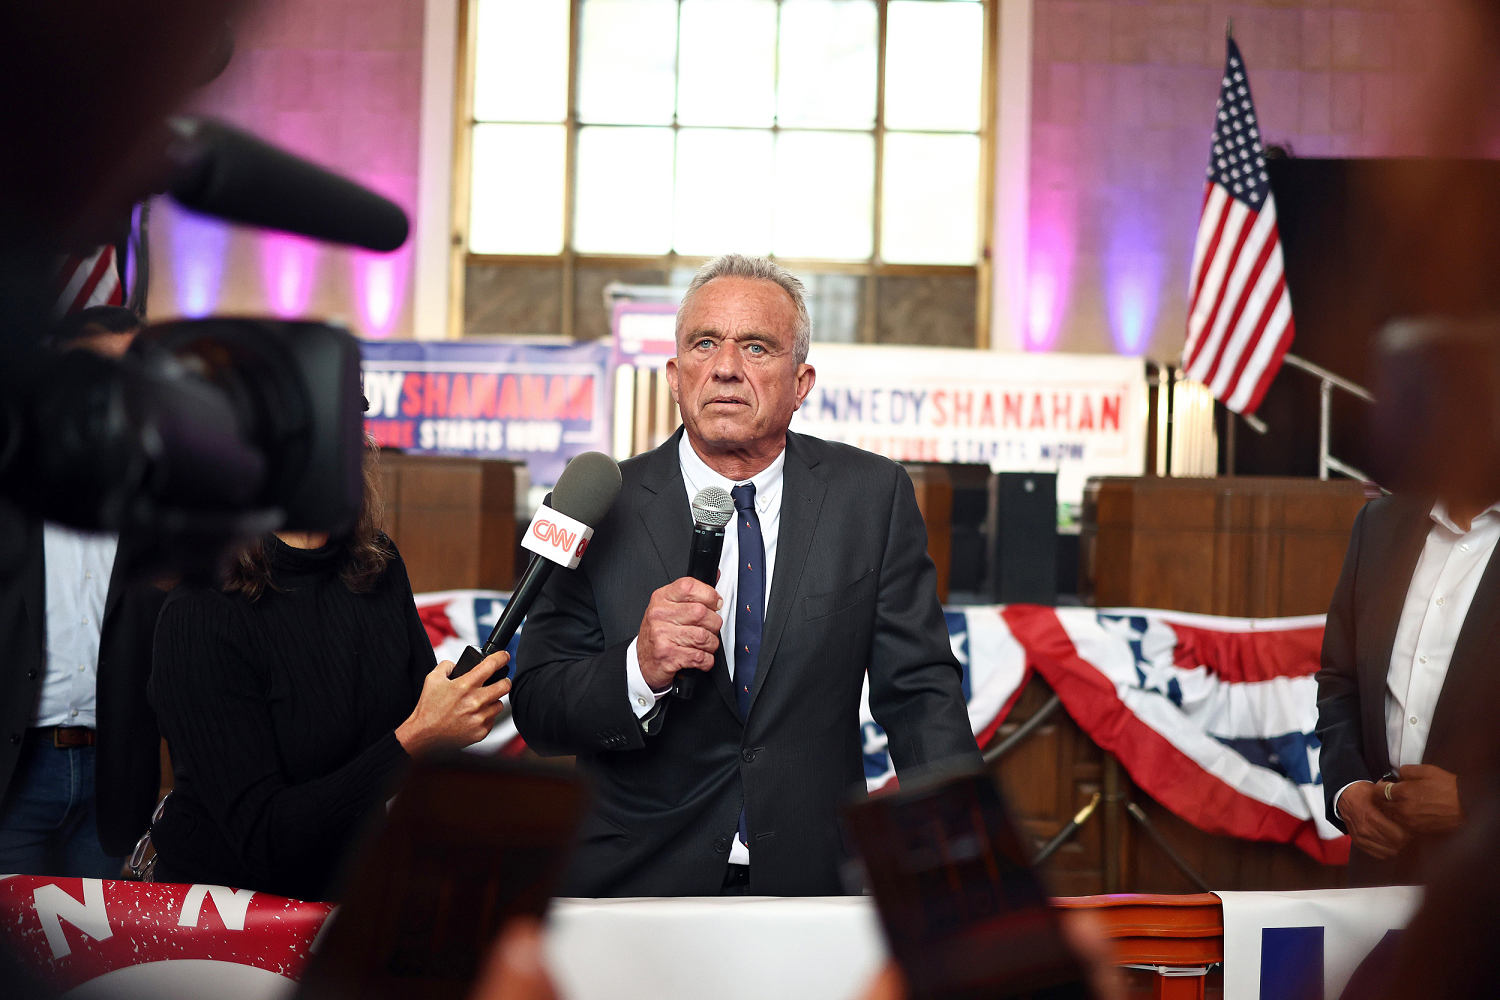 RFK Jr. campaign fires staffer who said defeating Biden was her 'No. 1 priority'